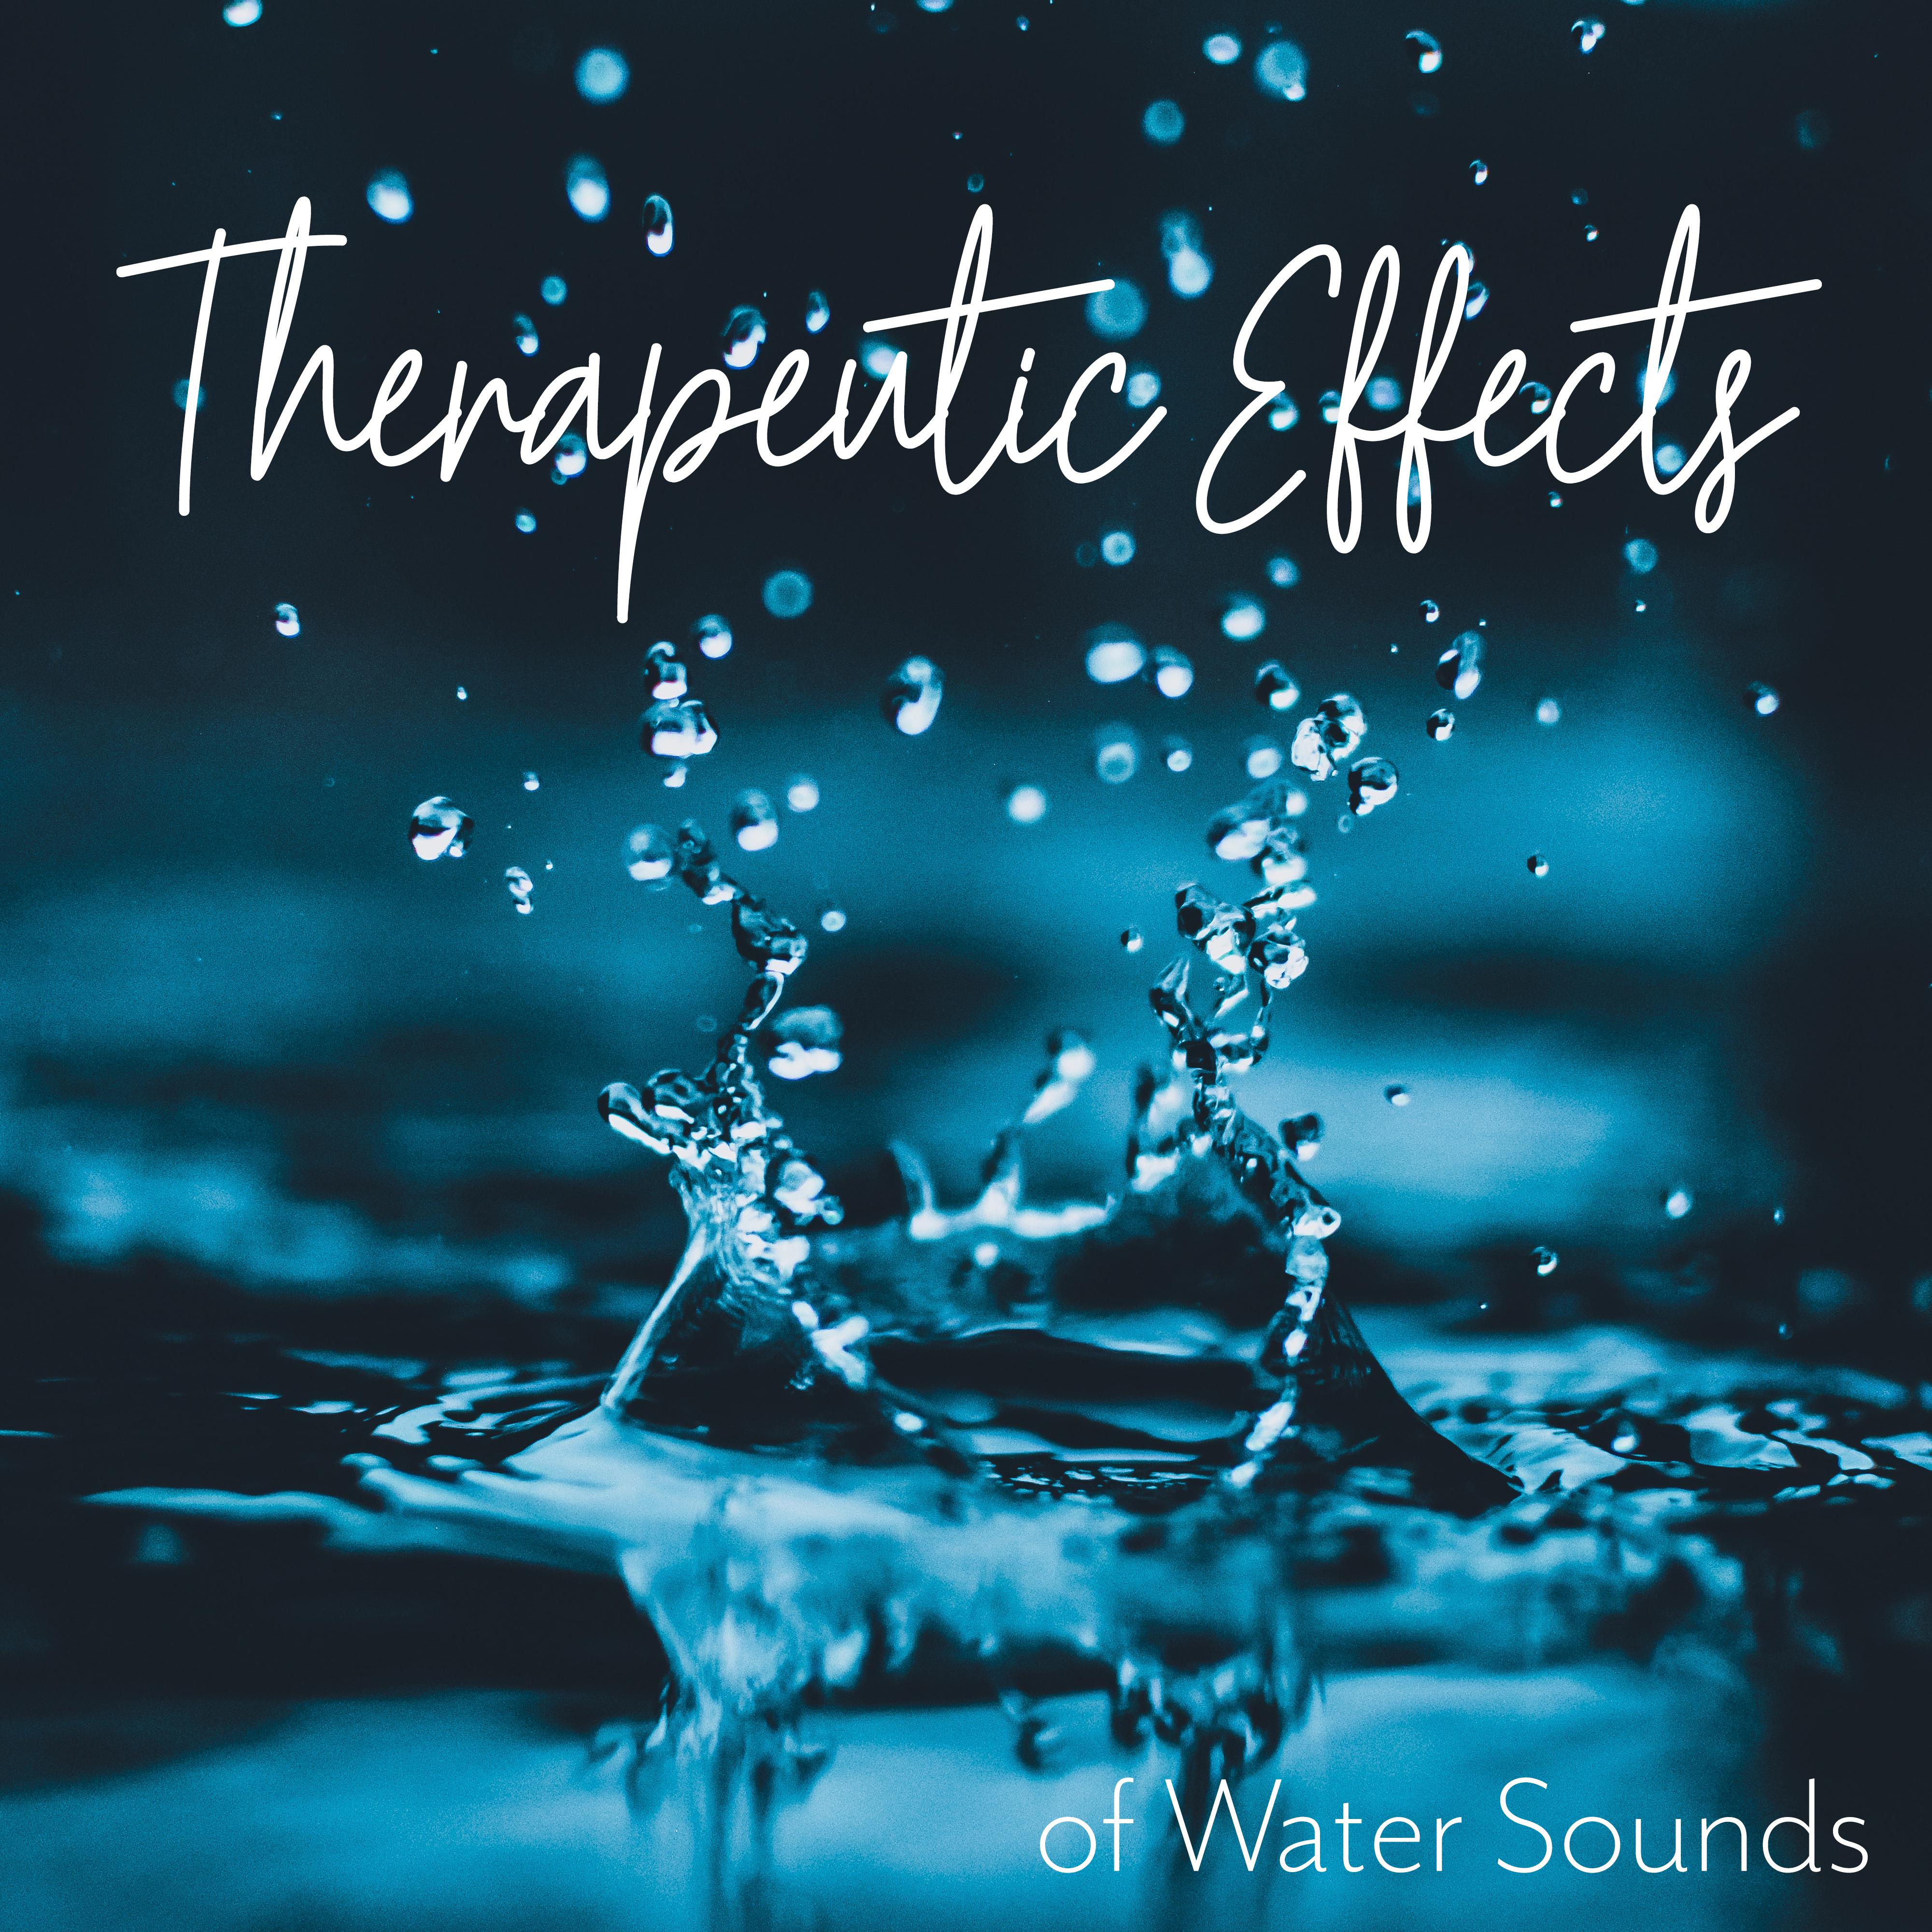 Therapeutic Effects of Water Sounds: 2019 Natural New Age Music for Total Relax, Sleep, Rest & Calm Down, Heal Your Body & Soul, Soothing Sounds, Inner Harmony